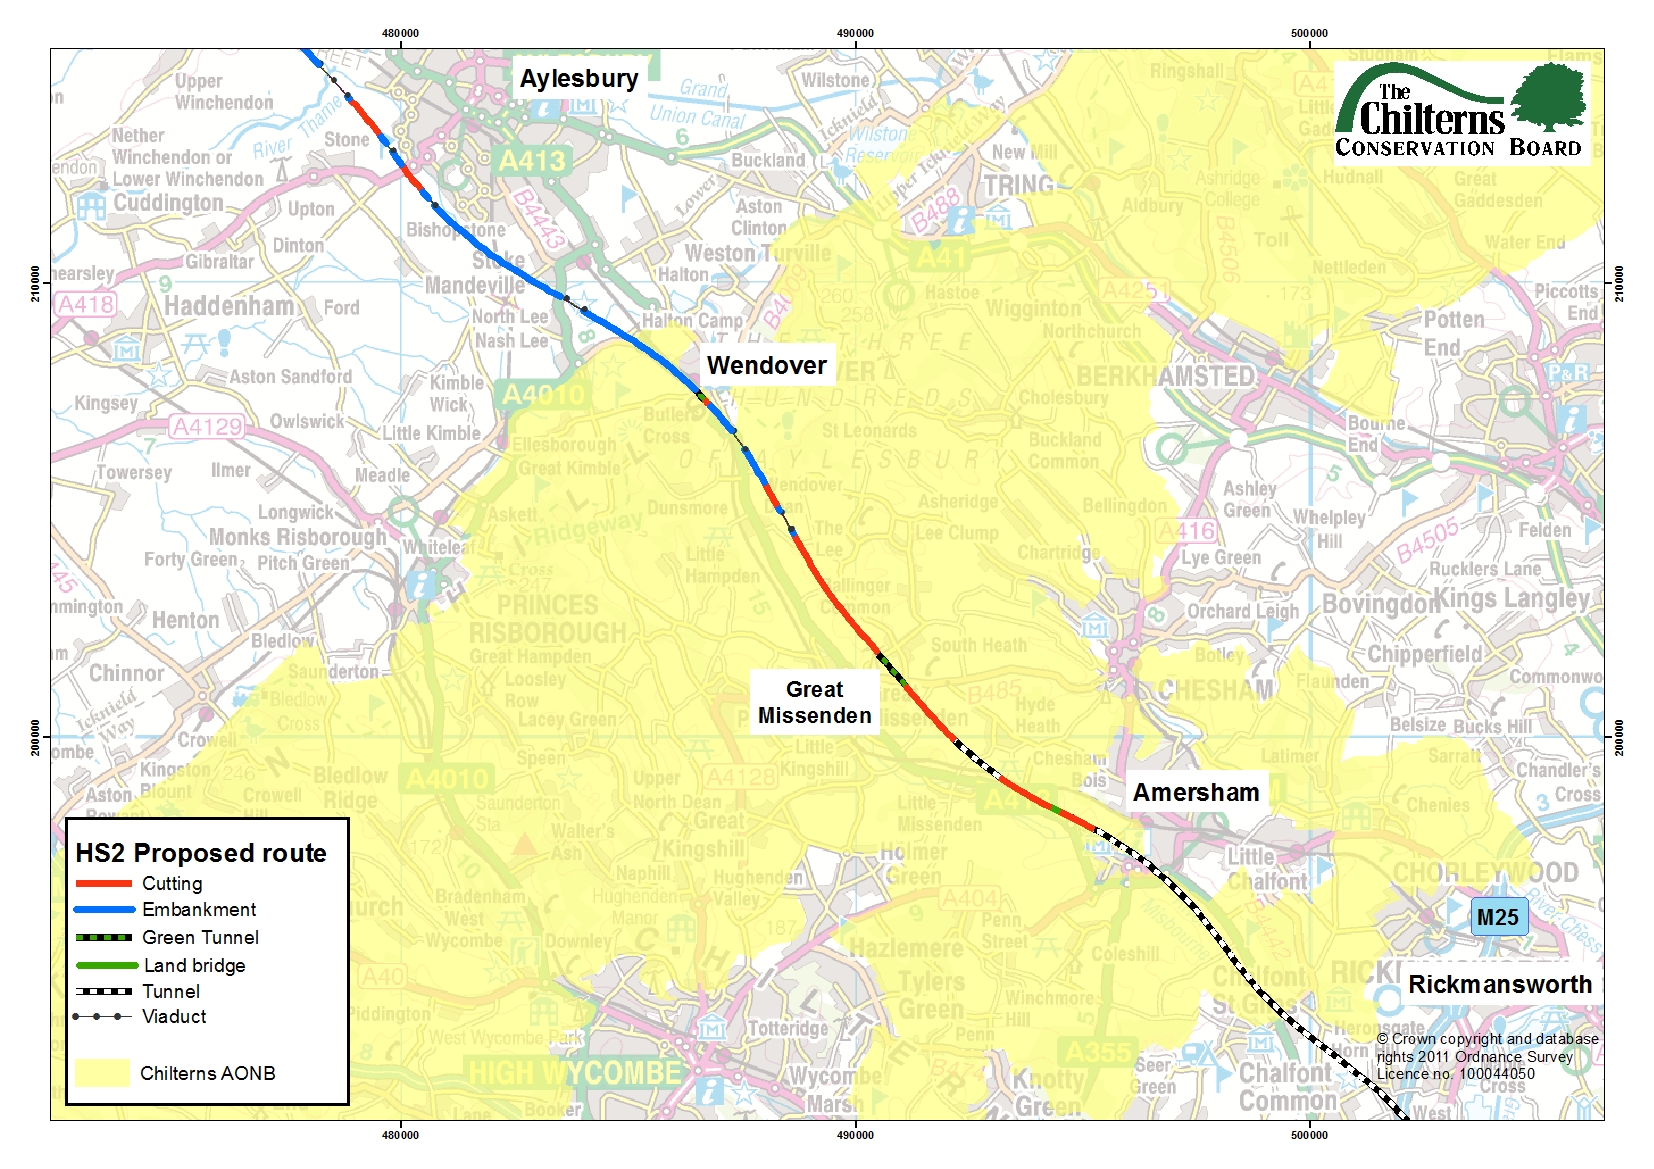 The proposed tunnel would be on the red & green bit next to Amersham on this map.